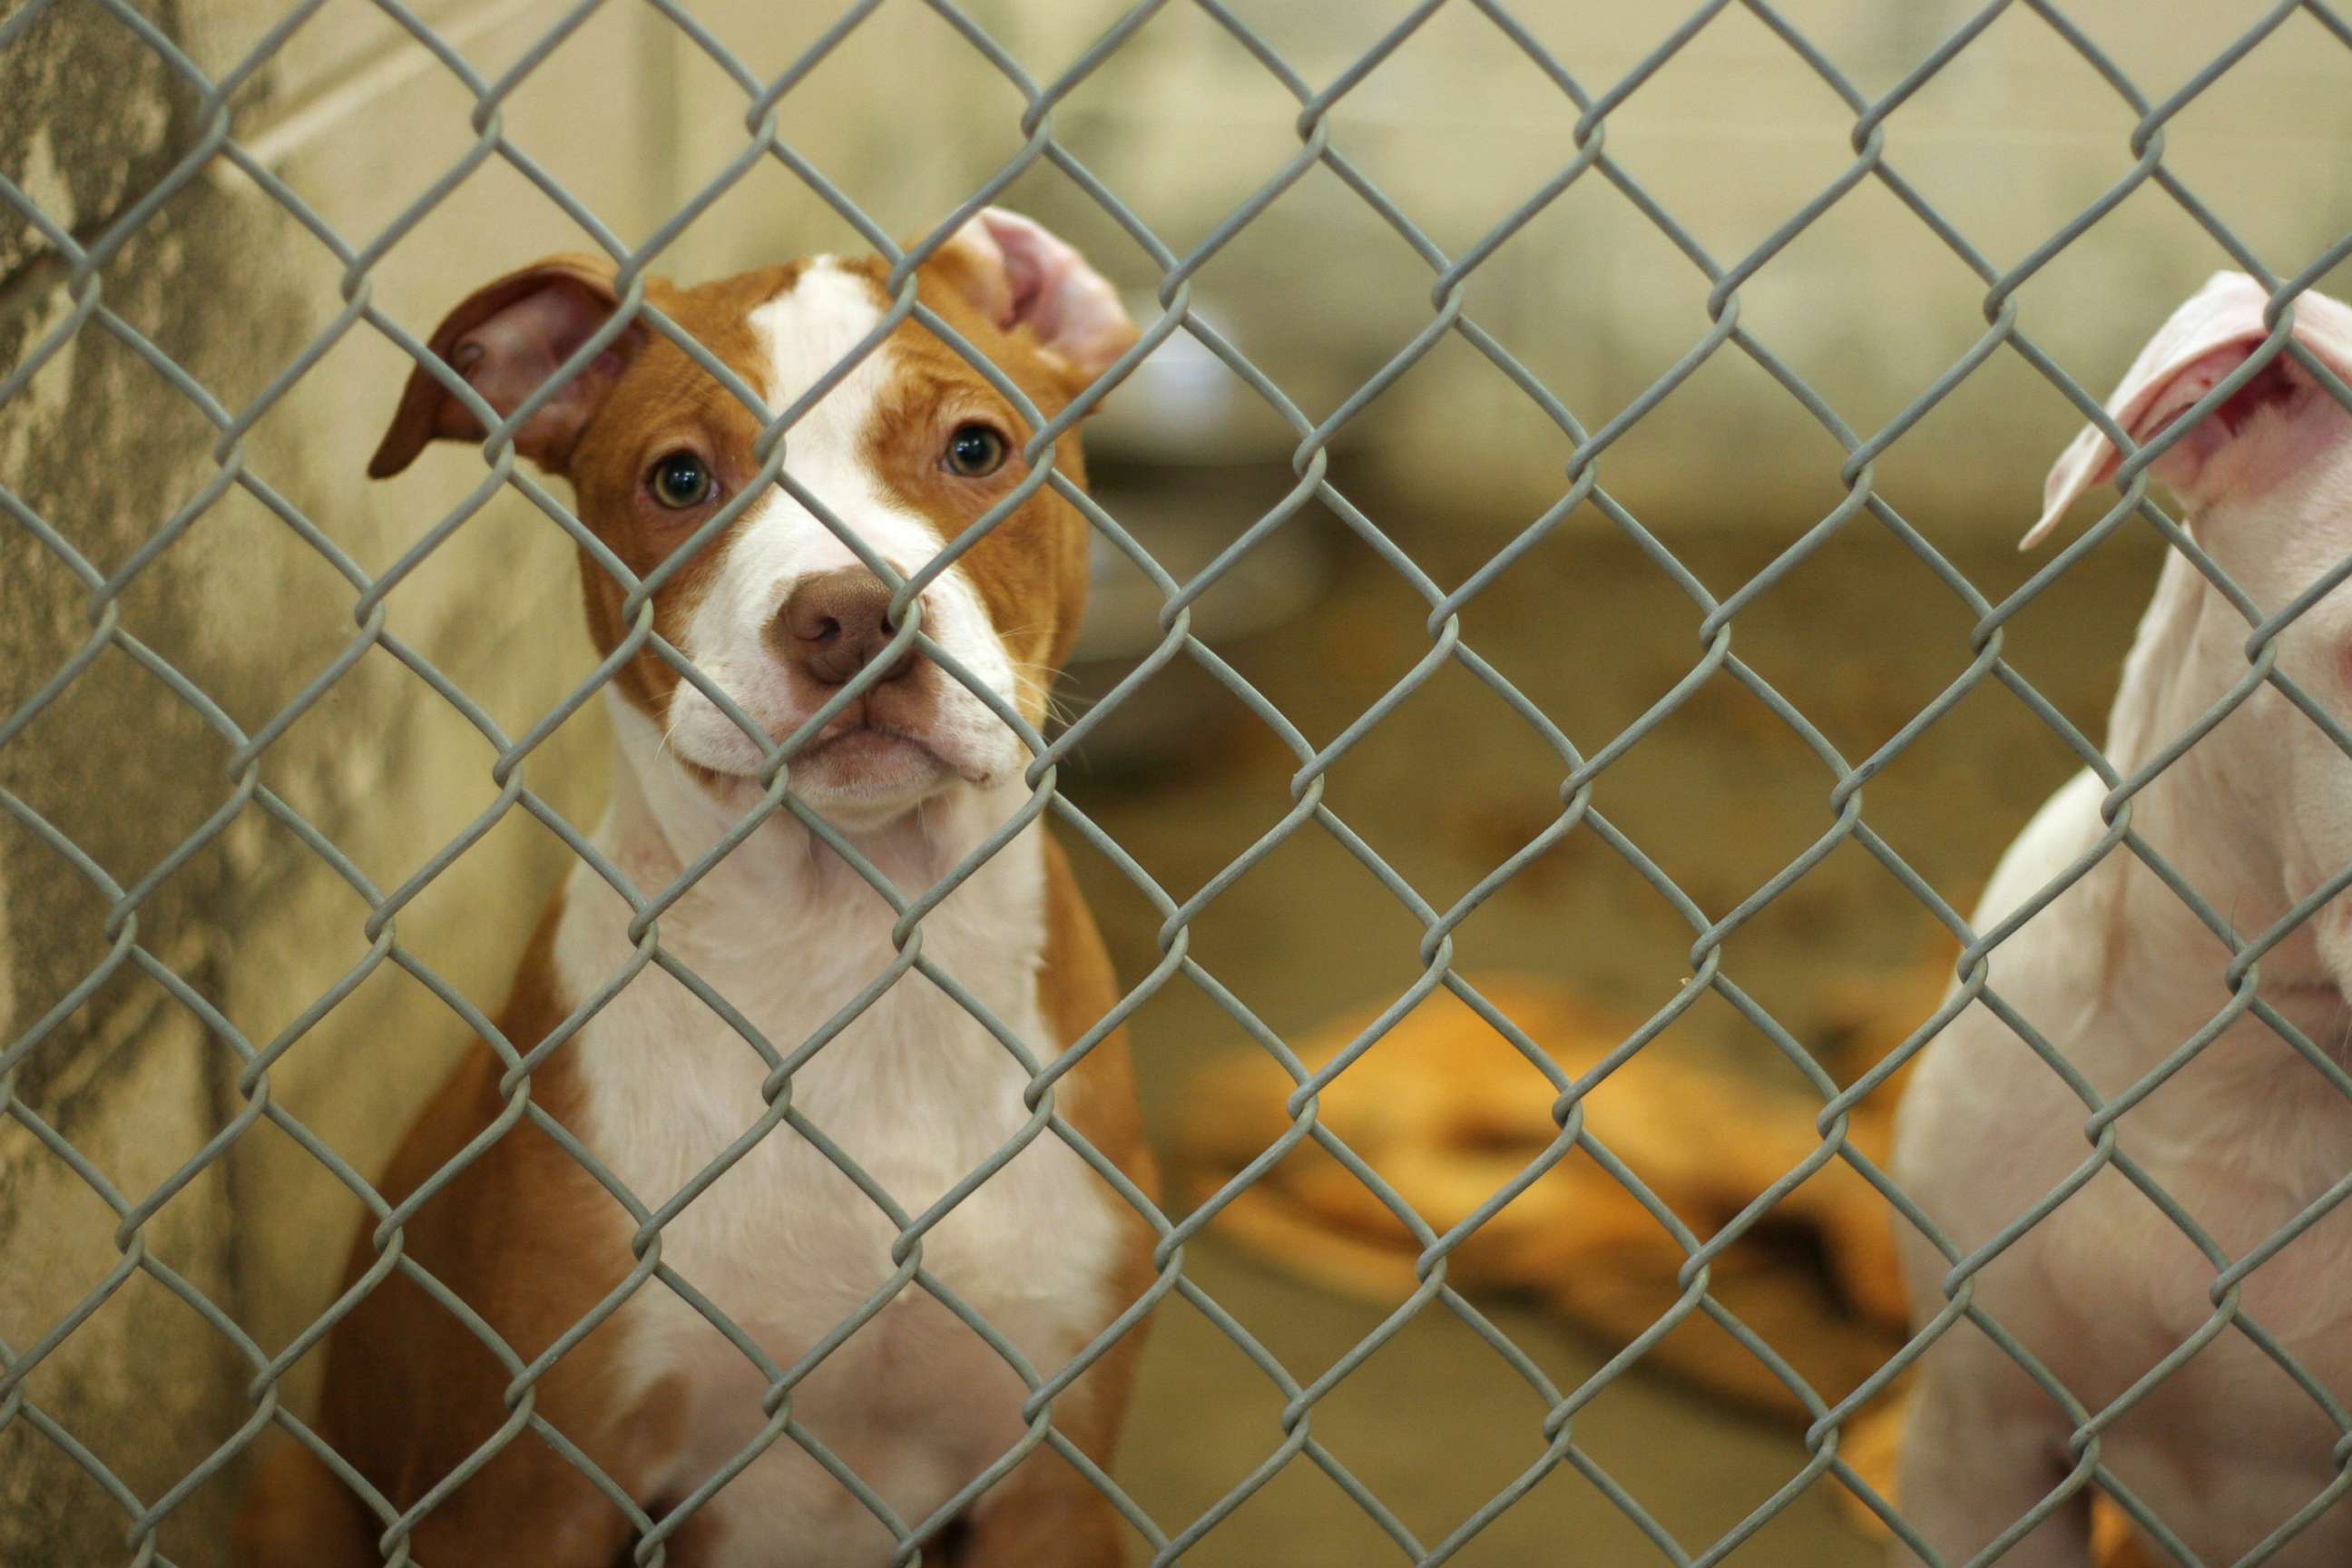 PHOTO: In this undated file photo, a dog eagerly awaits adoption from the animal shelter.